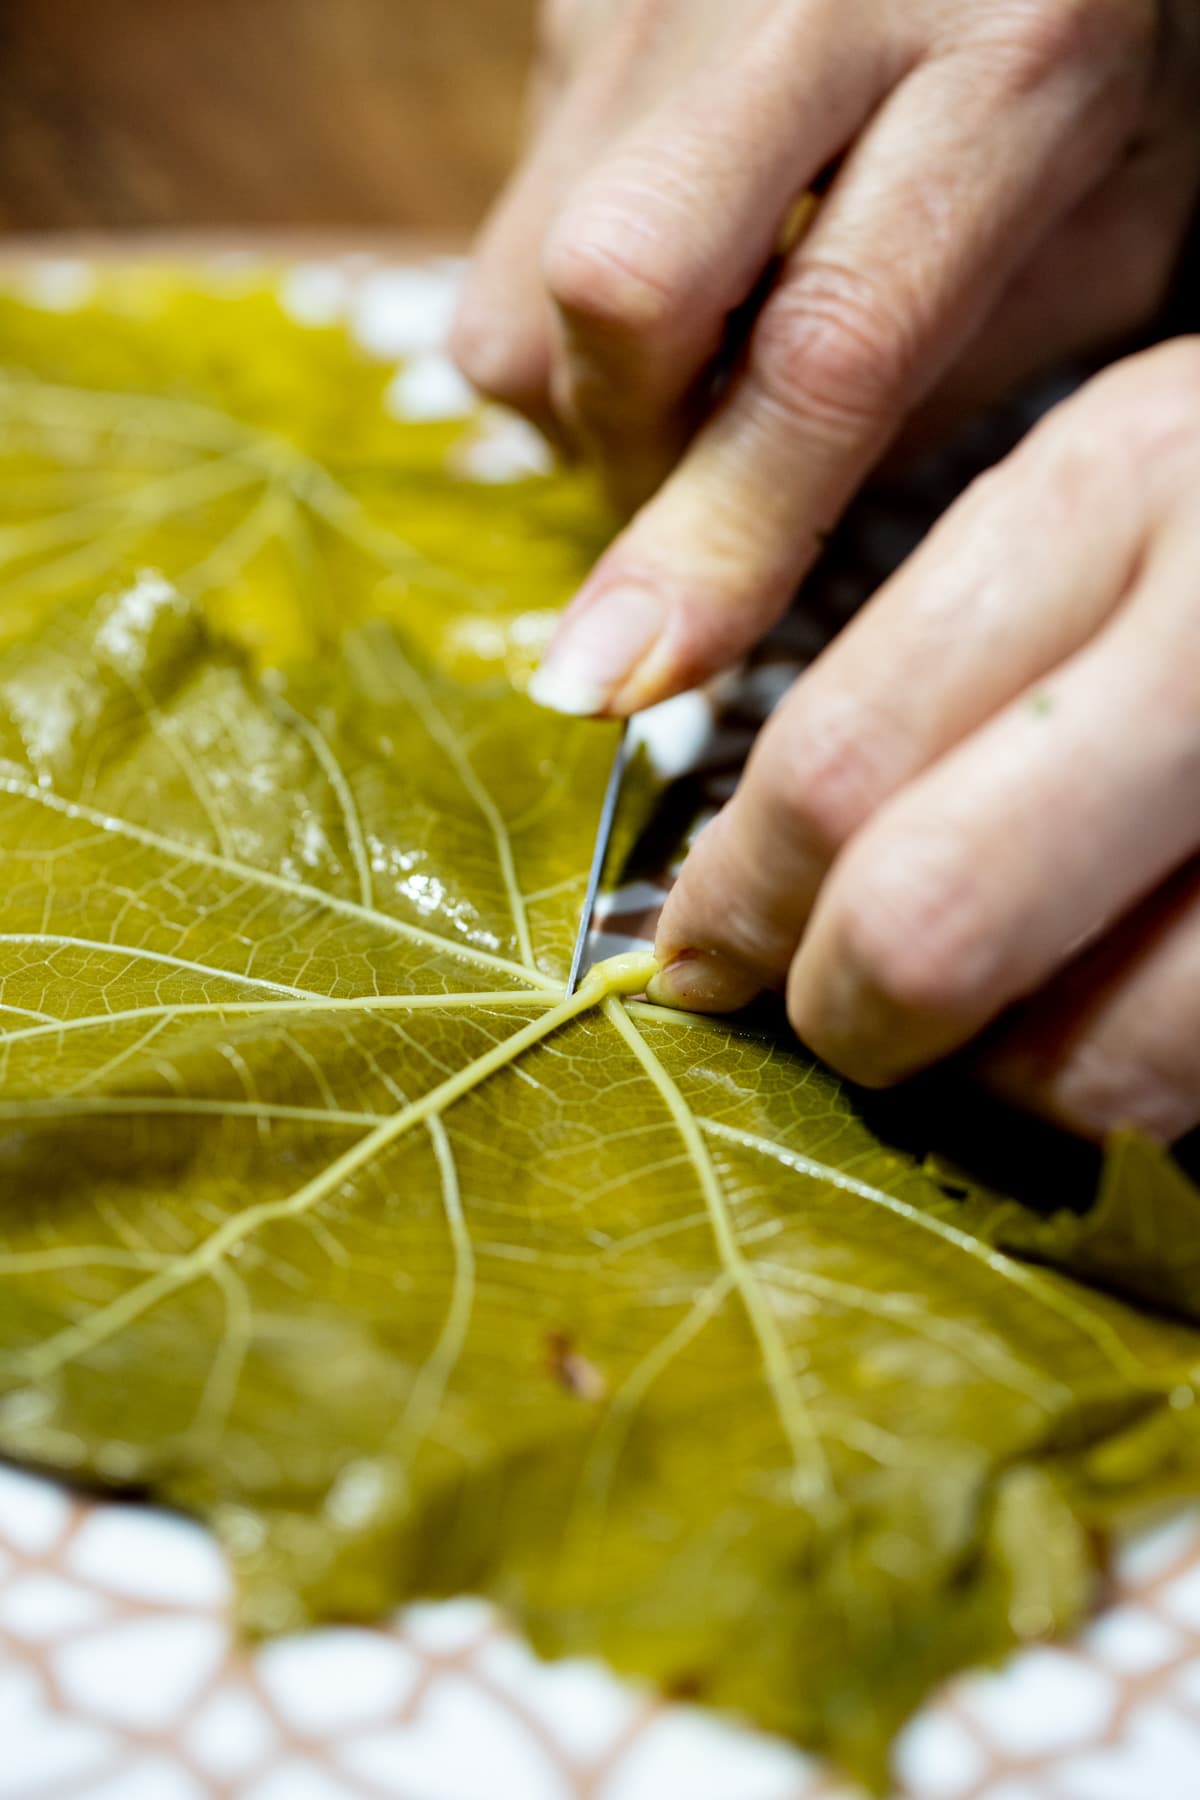 removing the stems of the grape leaves